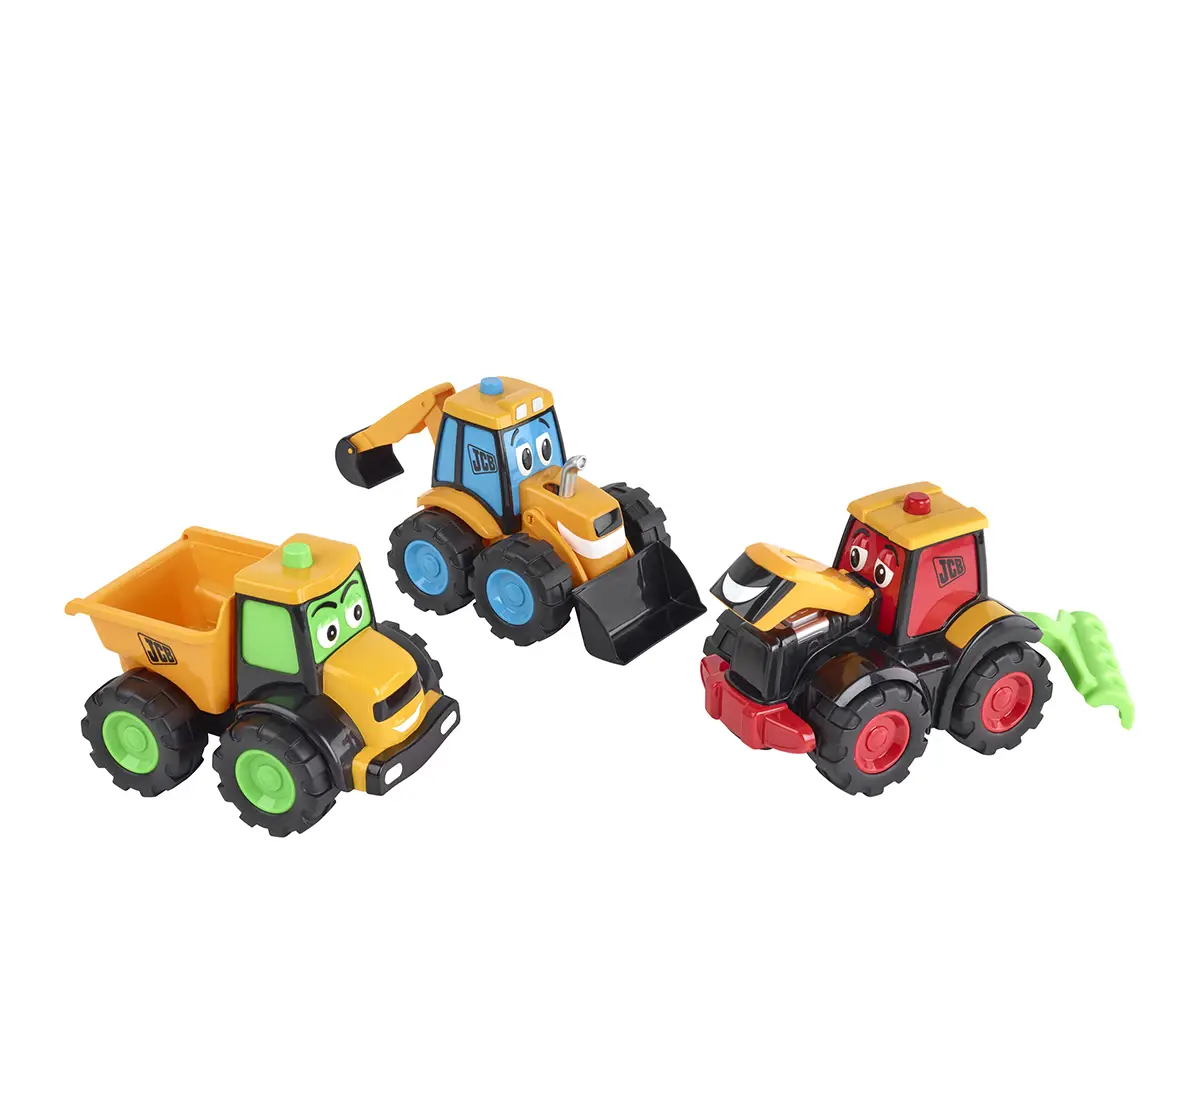 JCB My First Big Wheeler Action Team Construction Toys for kids 12M+, Multicolour